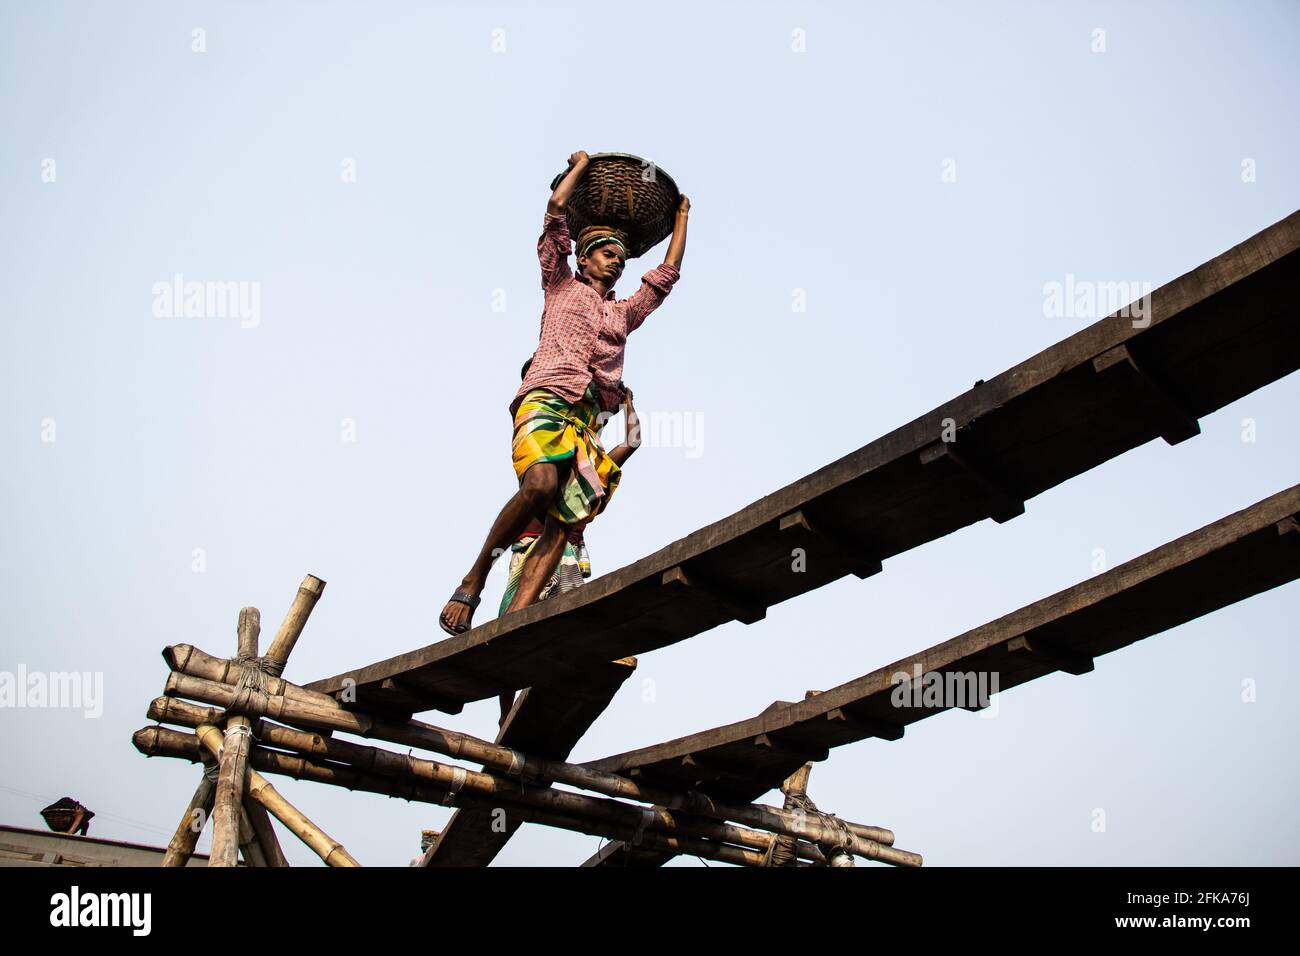 The motion of hard-working people, I captured this image on 17-11-2018 from  Amen Bazar, Dhaka, Bangladesh Stock Photo - Alamy